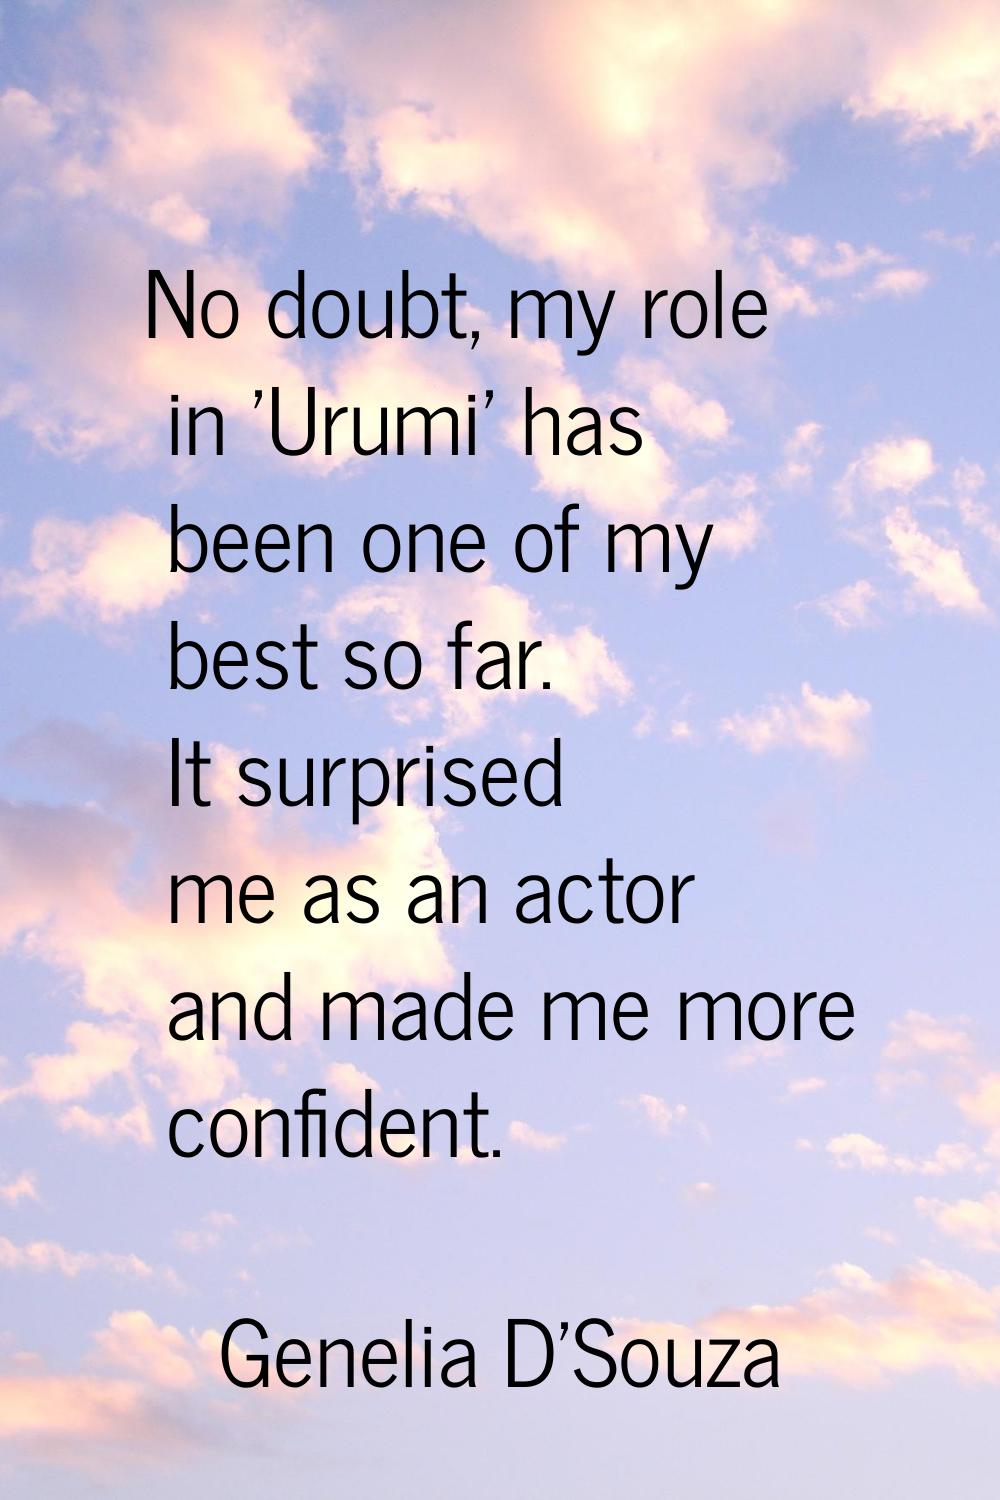 No doubt, my role in 'Urumi' has been one of my best so far. It surprised me as an actor and made m